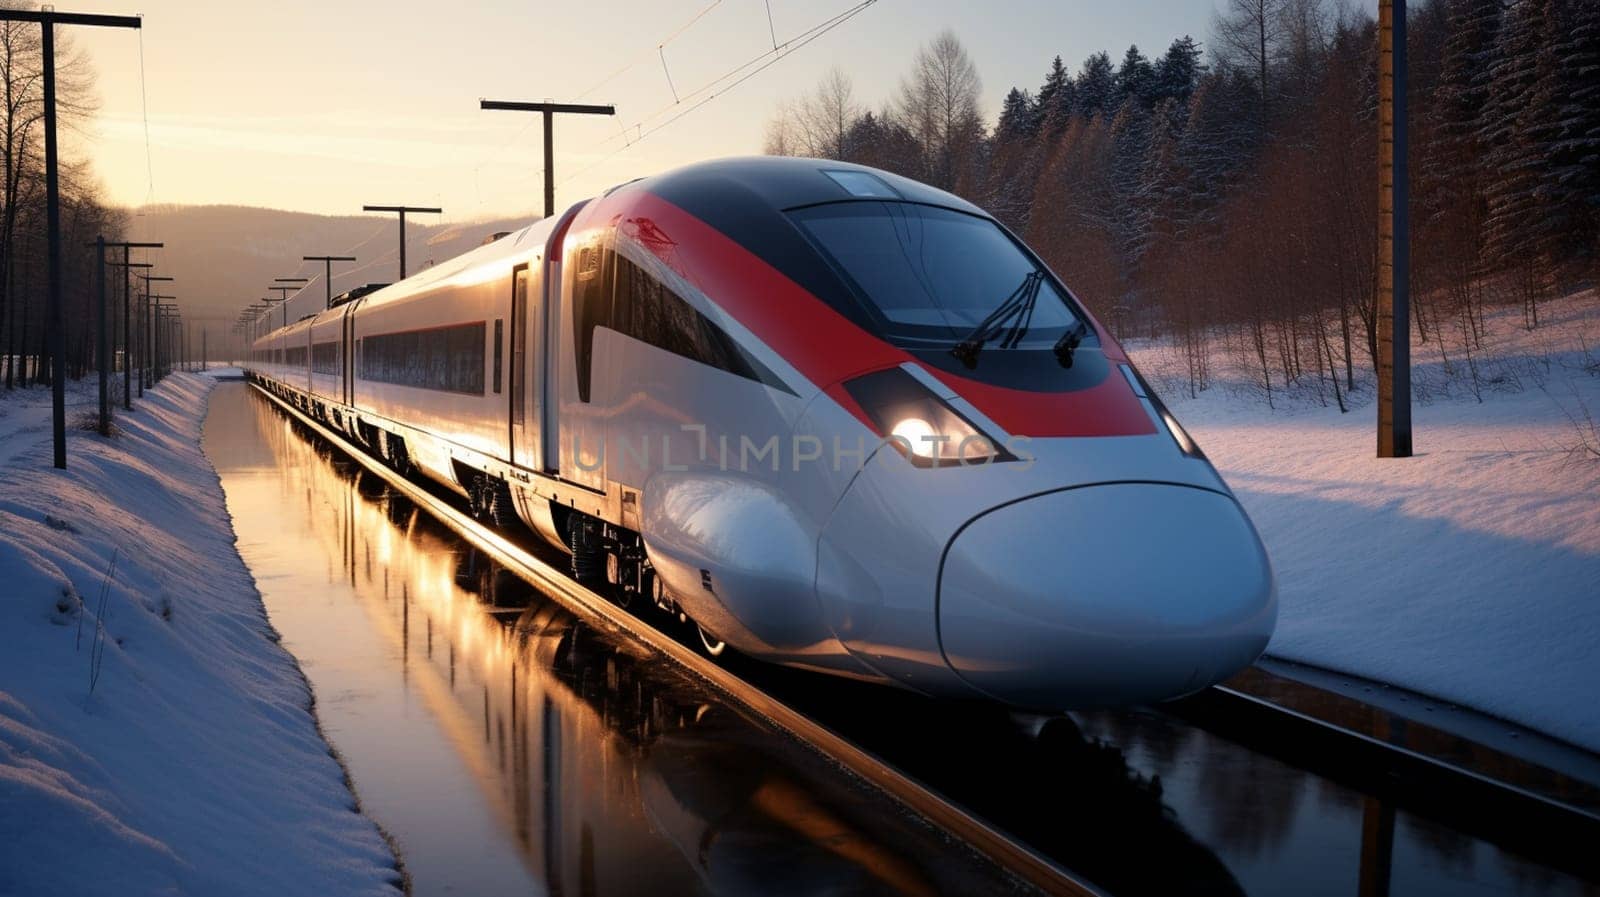 Beautiful photo of high speed modern commuter train, motion blur. by Andelov13